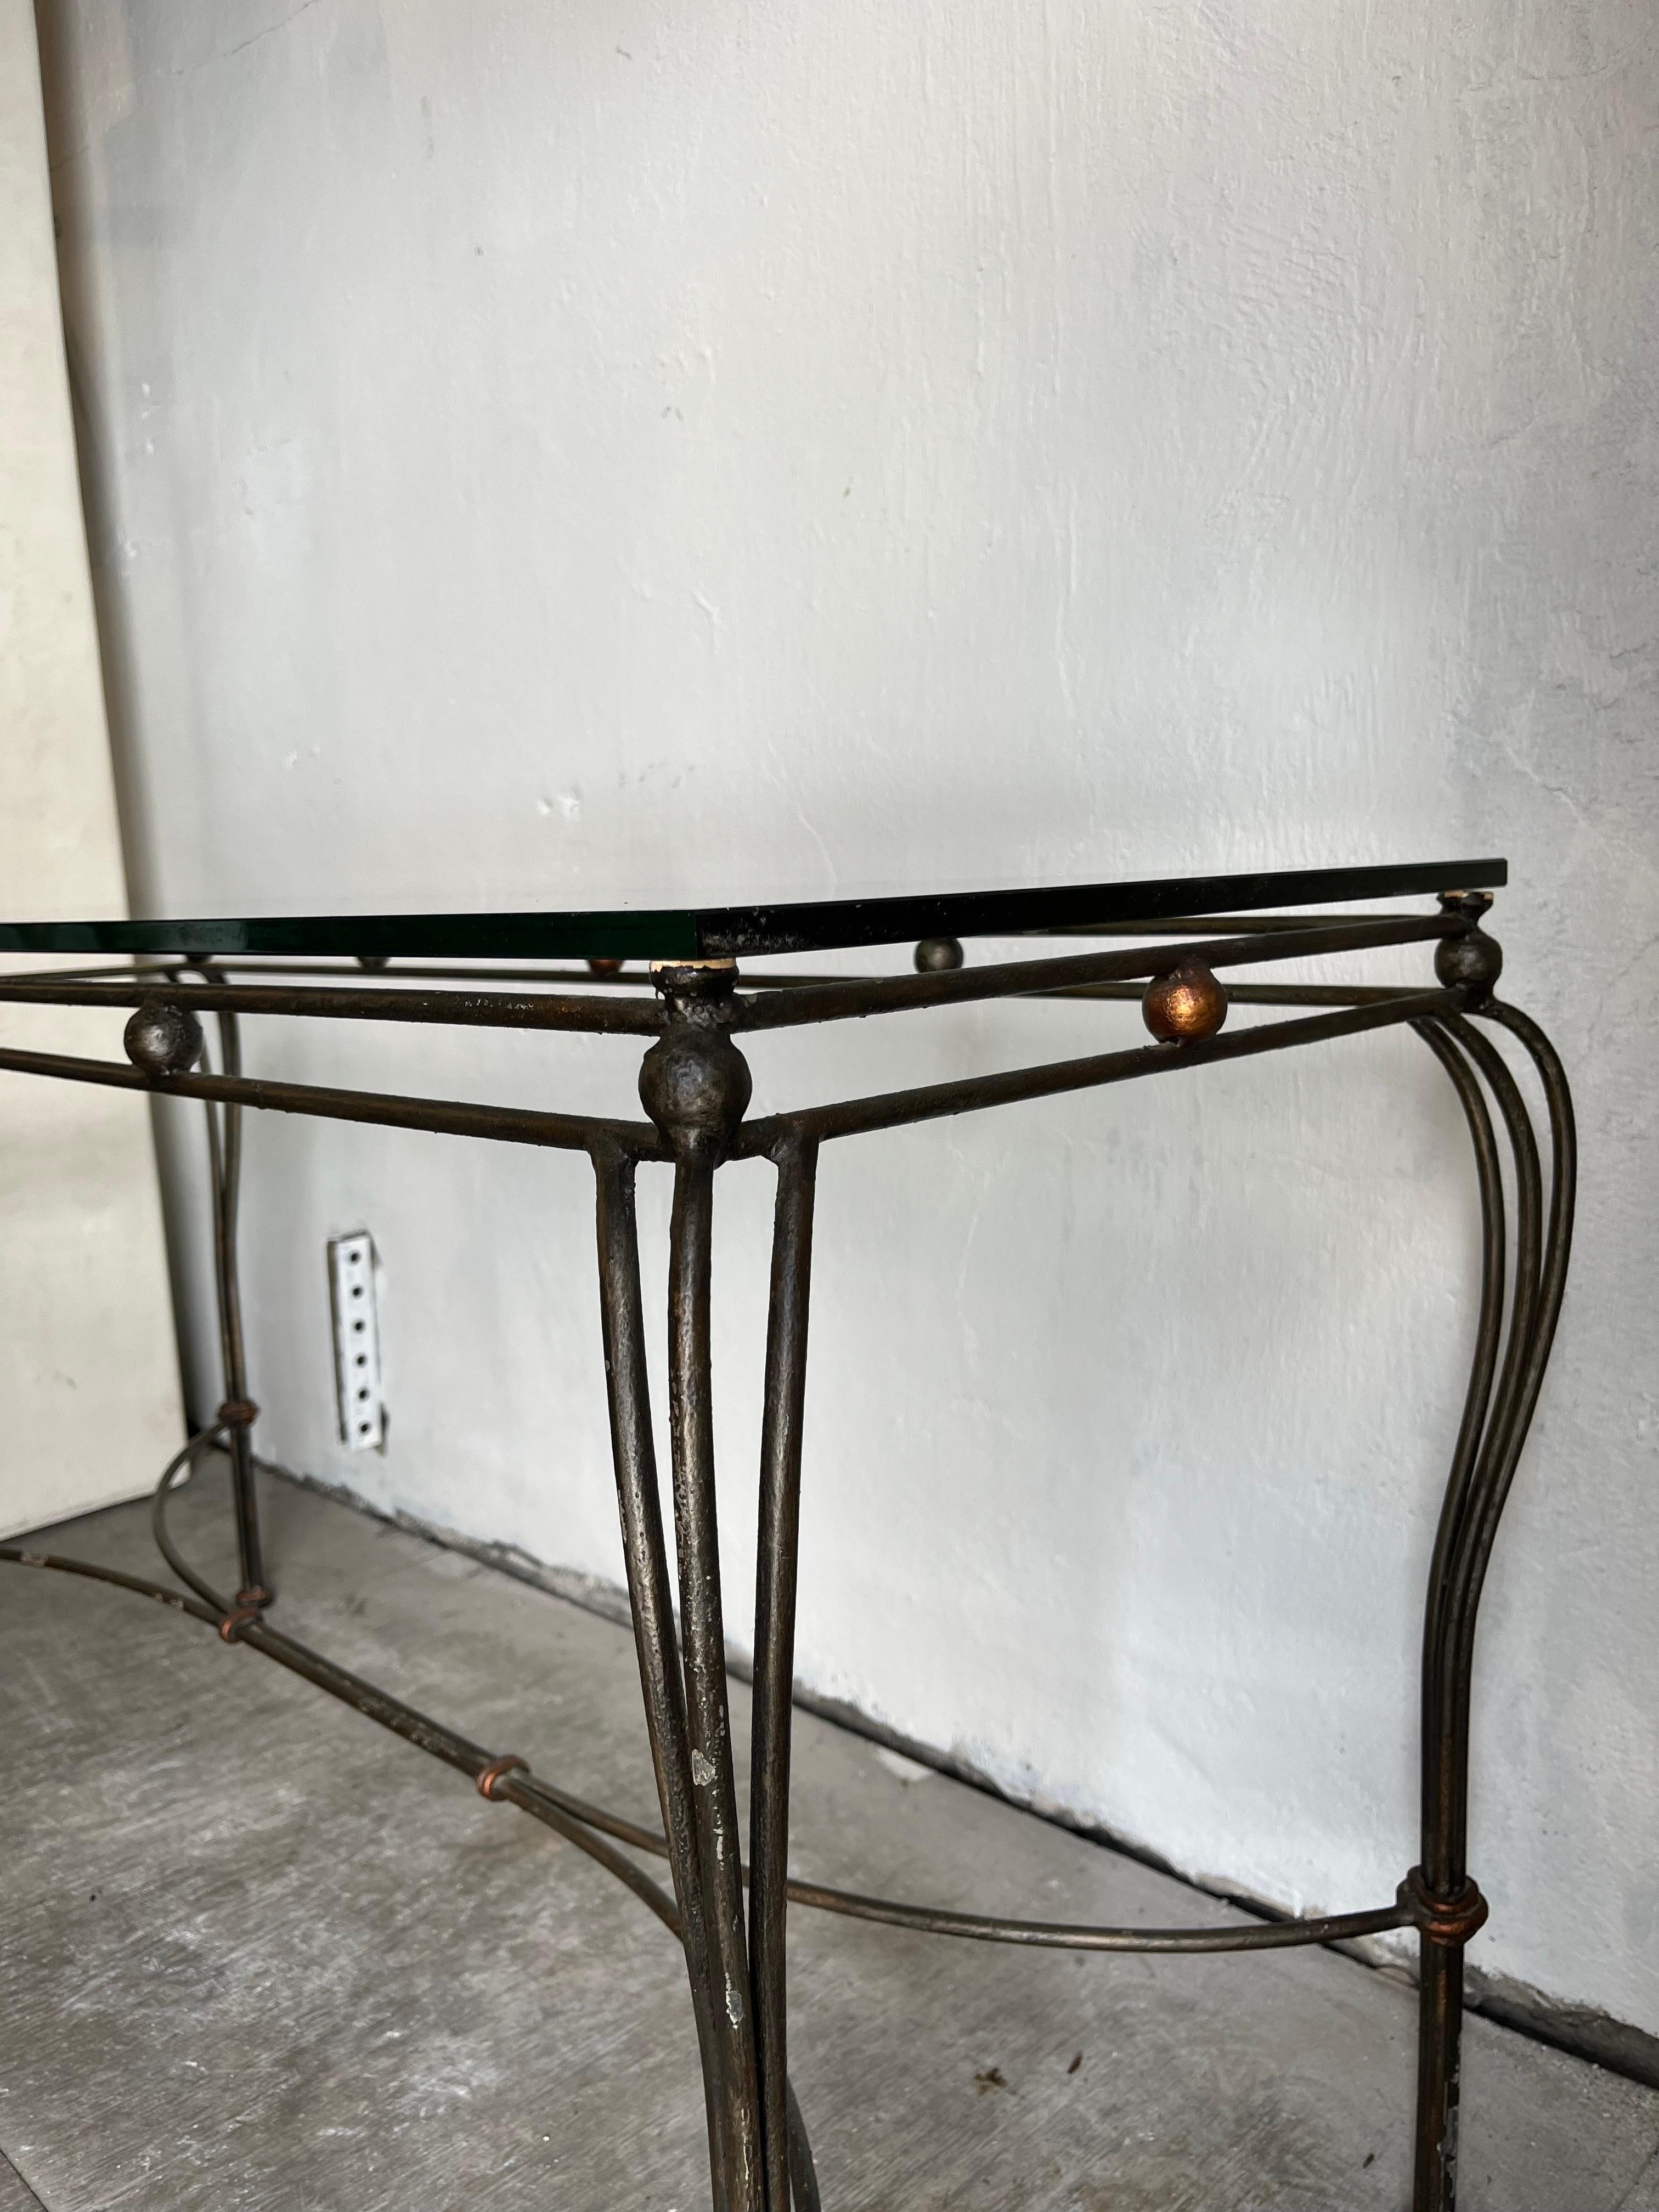 Vintage Wrought Iron Console Sofa Table In Good Condition For Sale In W Allenhurst, NJ